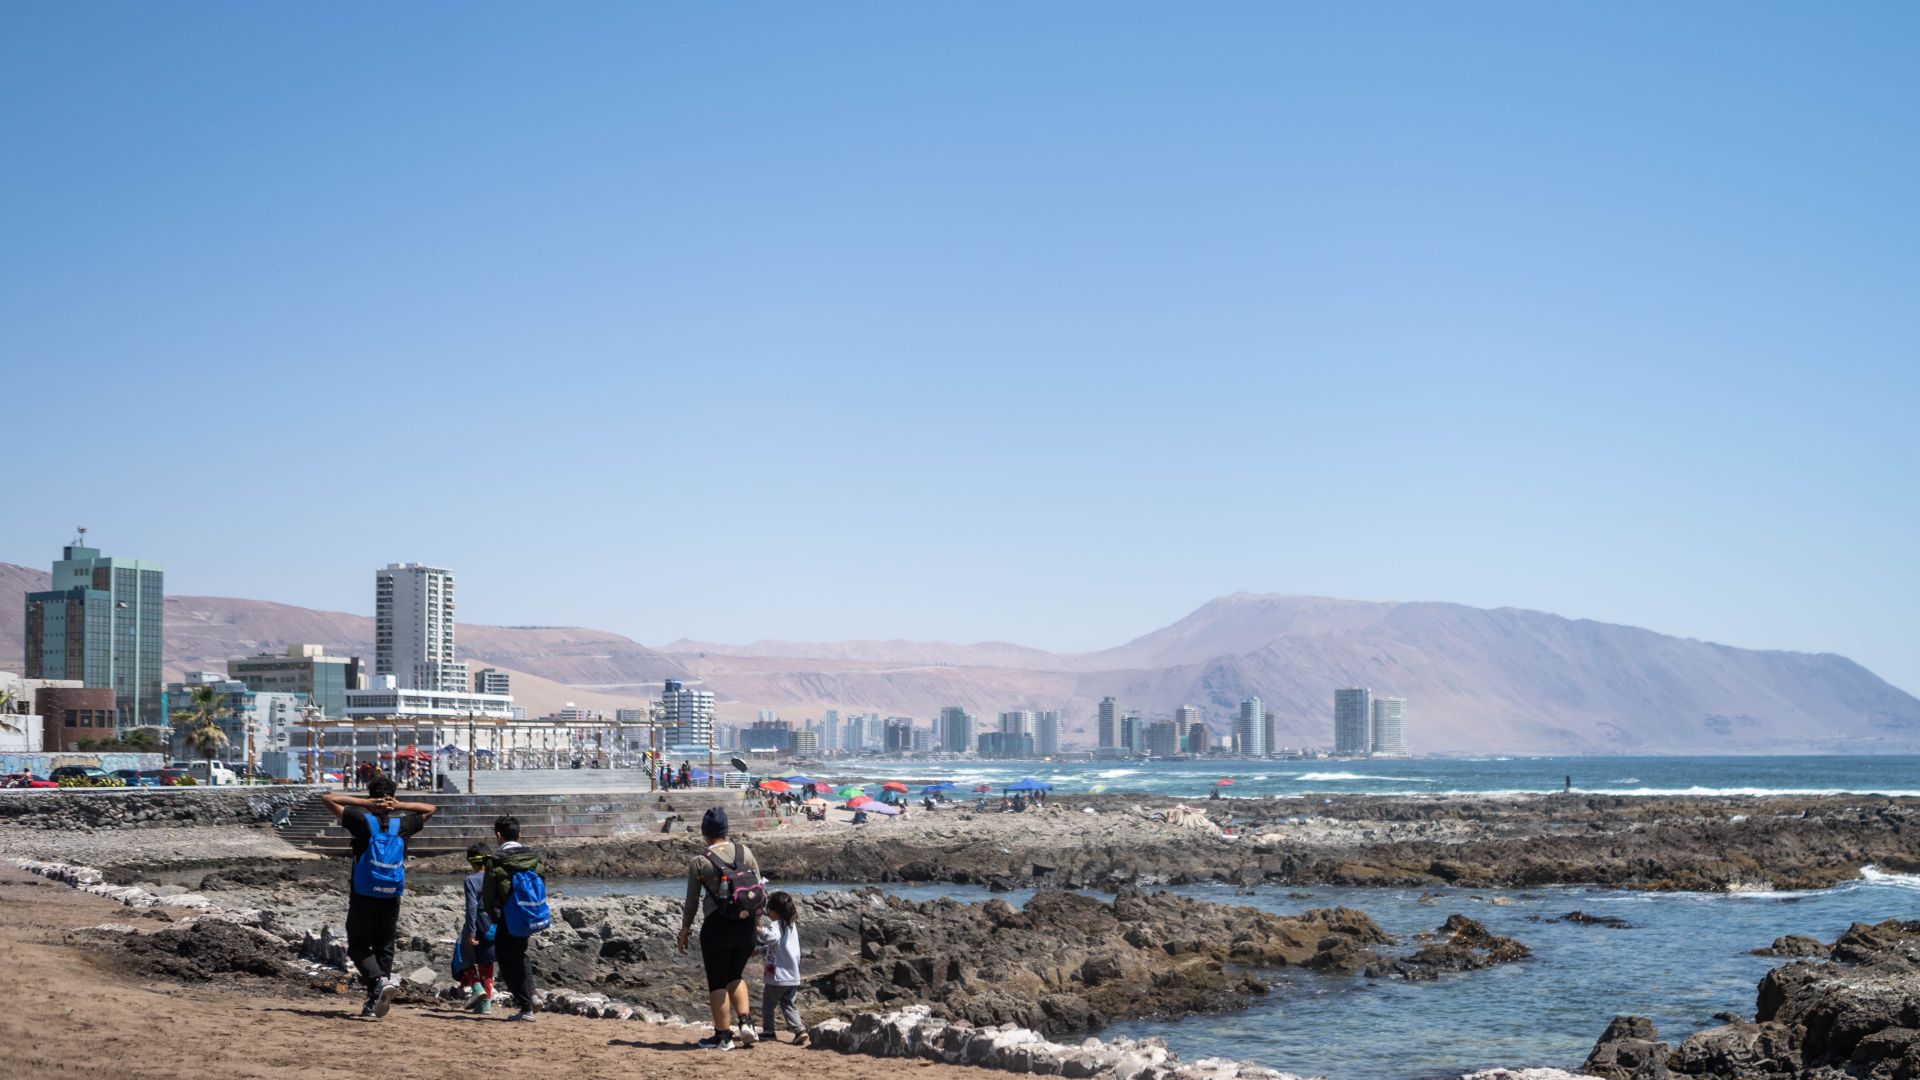 Allyson and her family walk along the shores in Iquique, Chile.